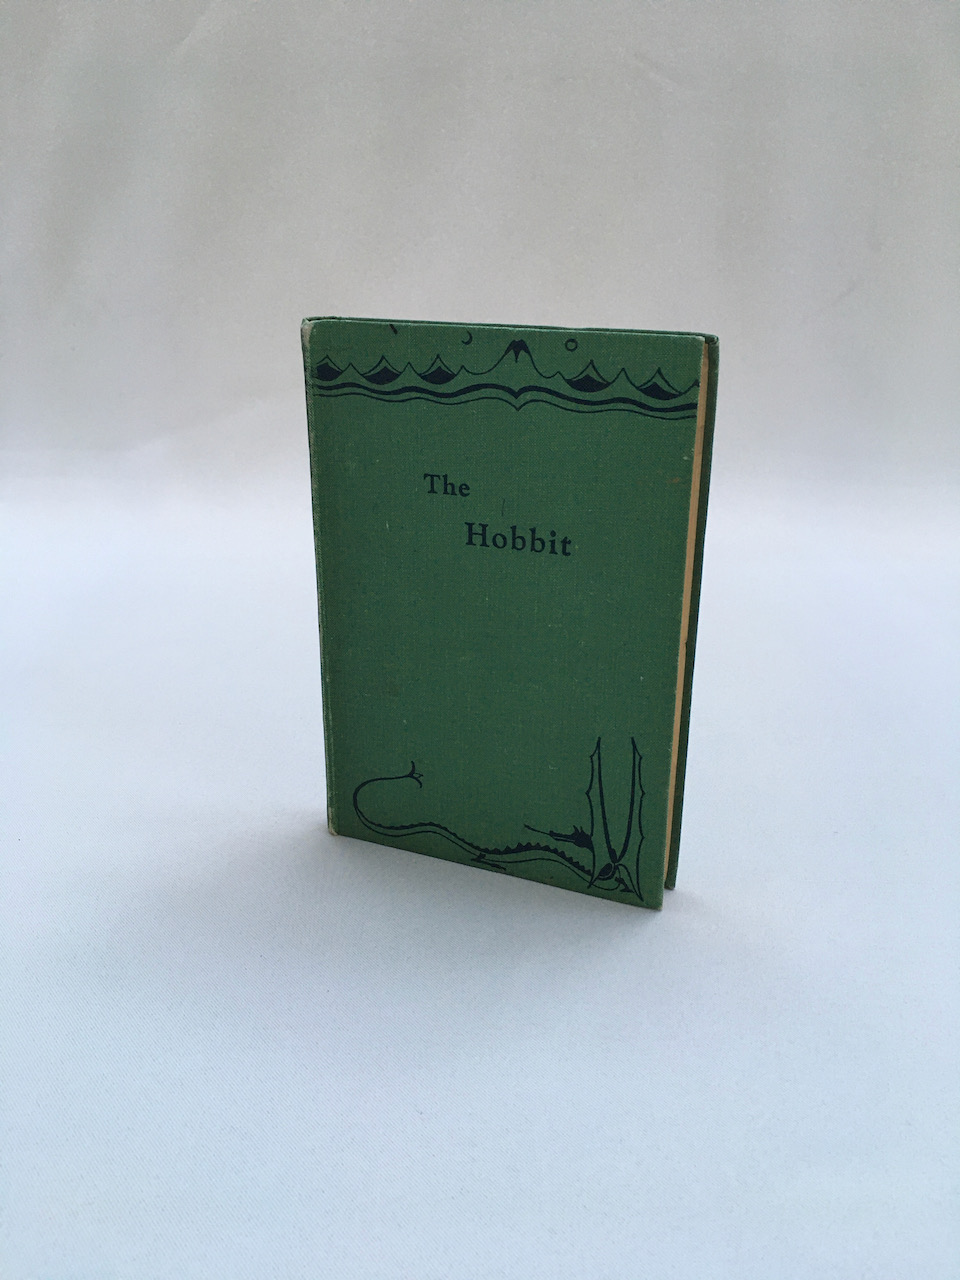 The Hobbit, or There and Back Again, by J.R.R. Tolkien. Published by Allen & Unwin in 1942